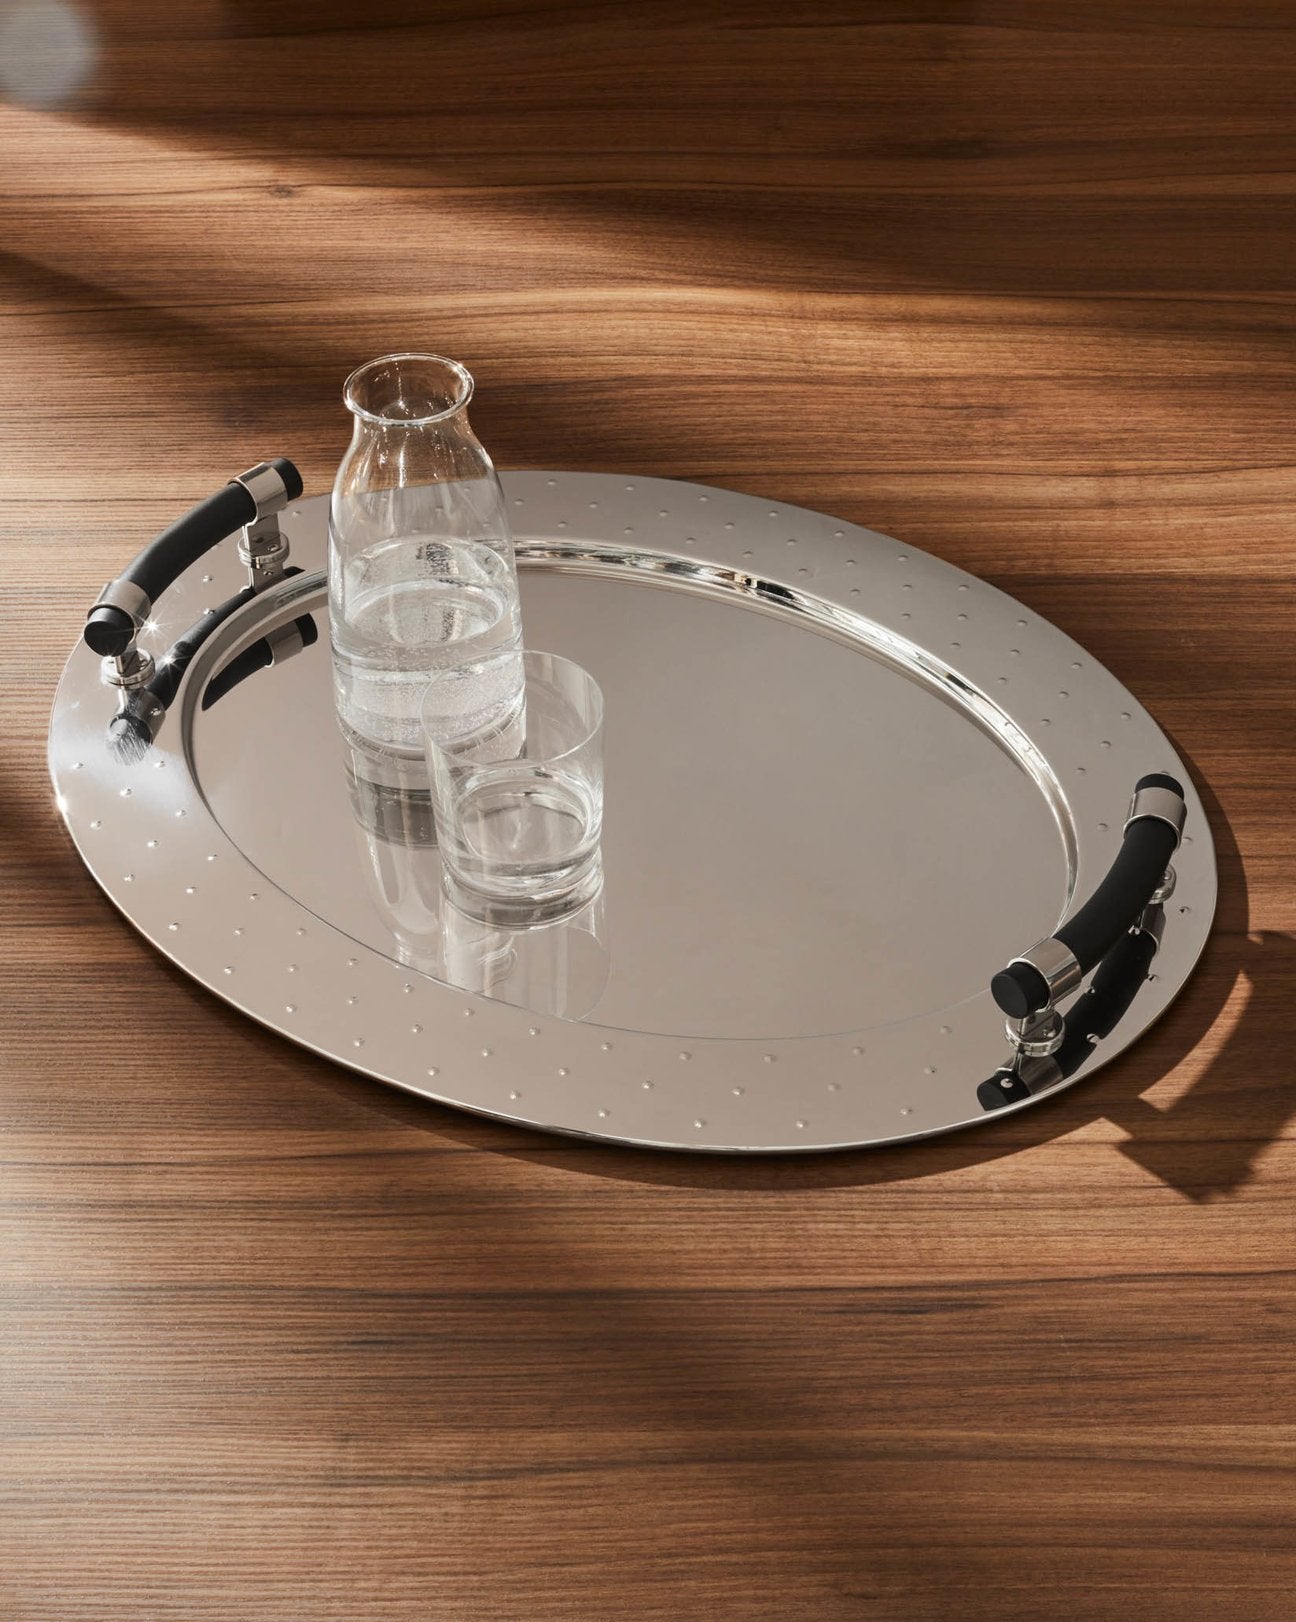 Alessi Oval Tray by Michael Graves | Panik Design